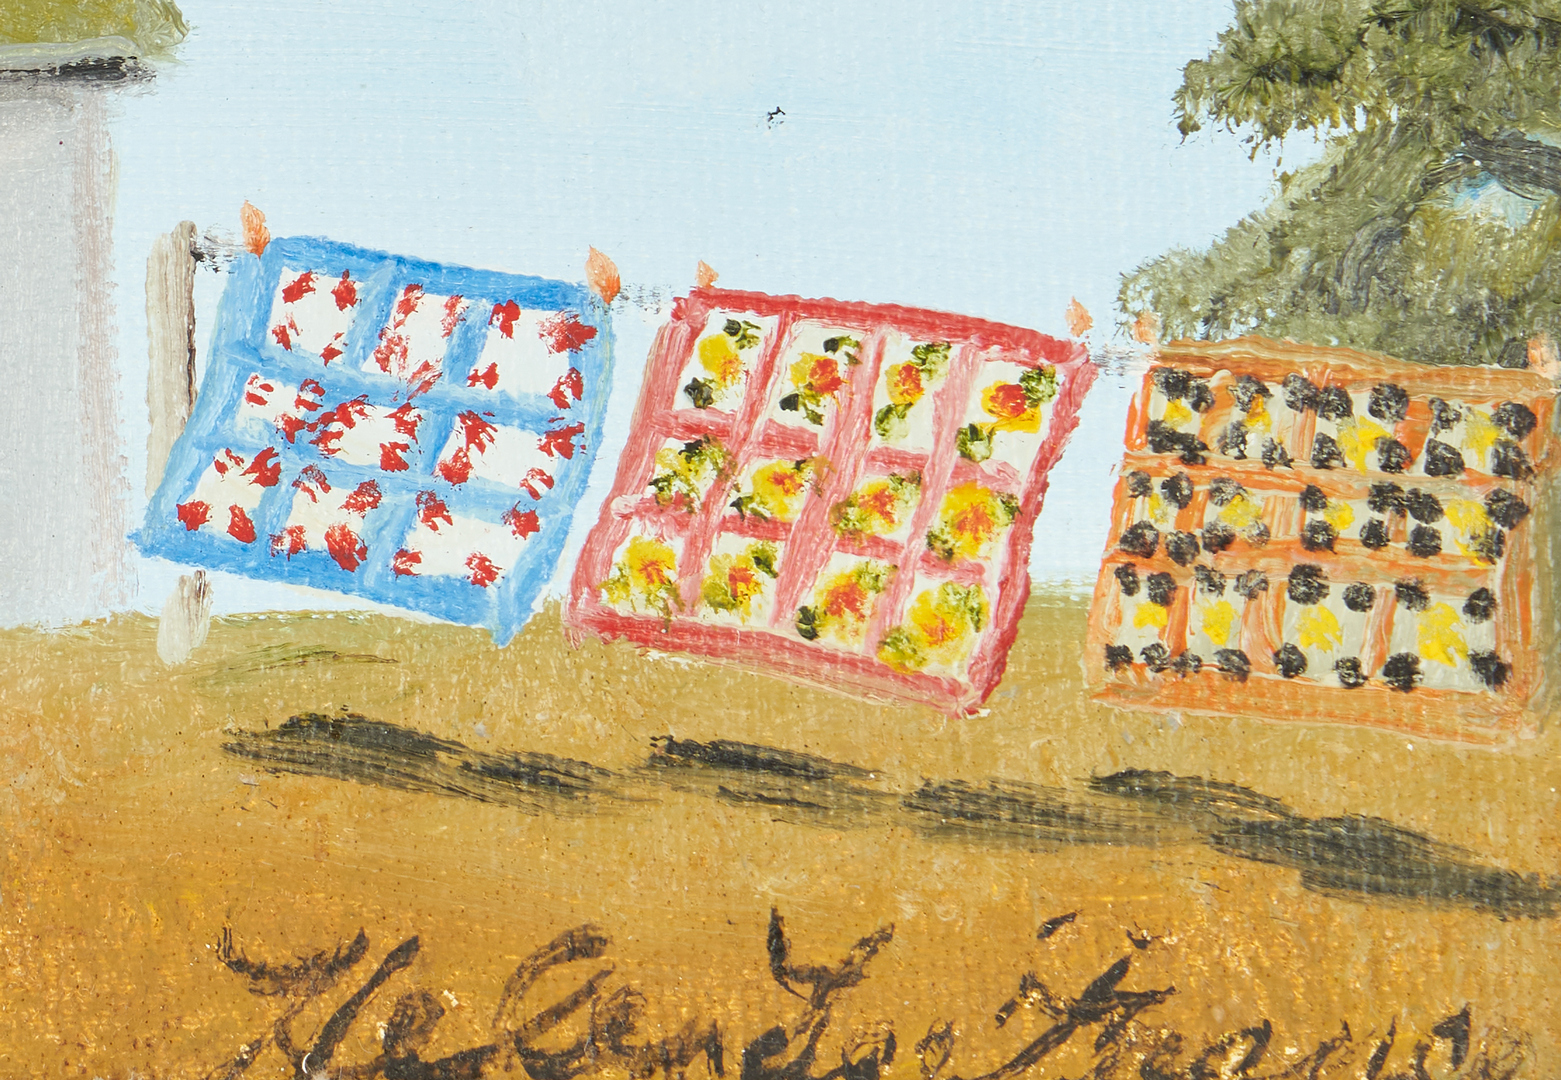 Lot 442: 2 Small Helen LaFrance Paintings, Quilts on a Line